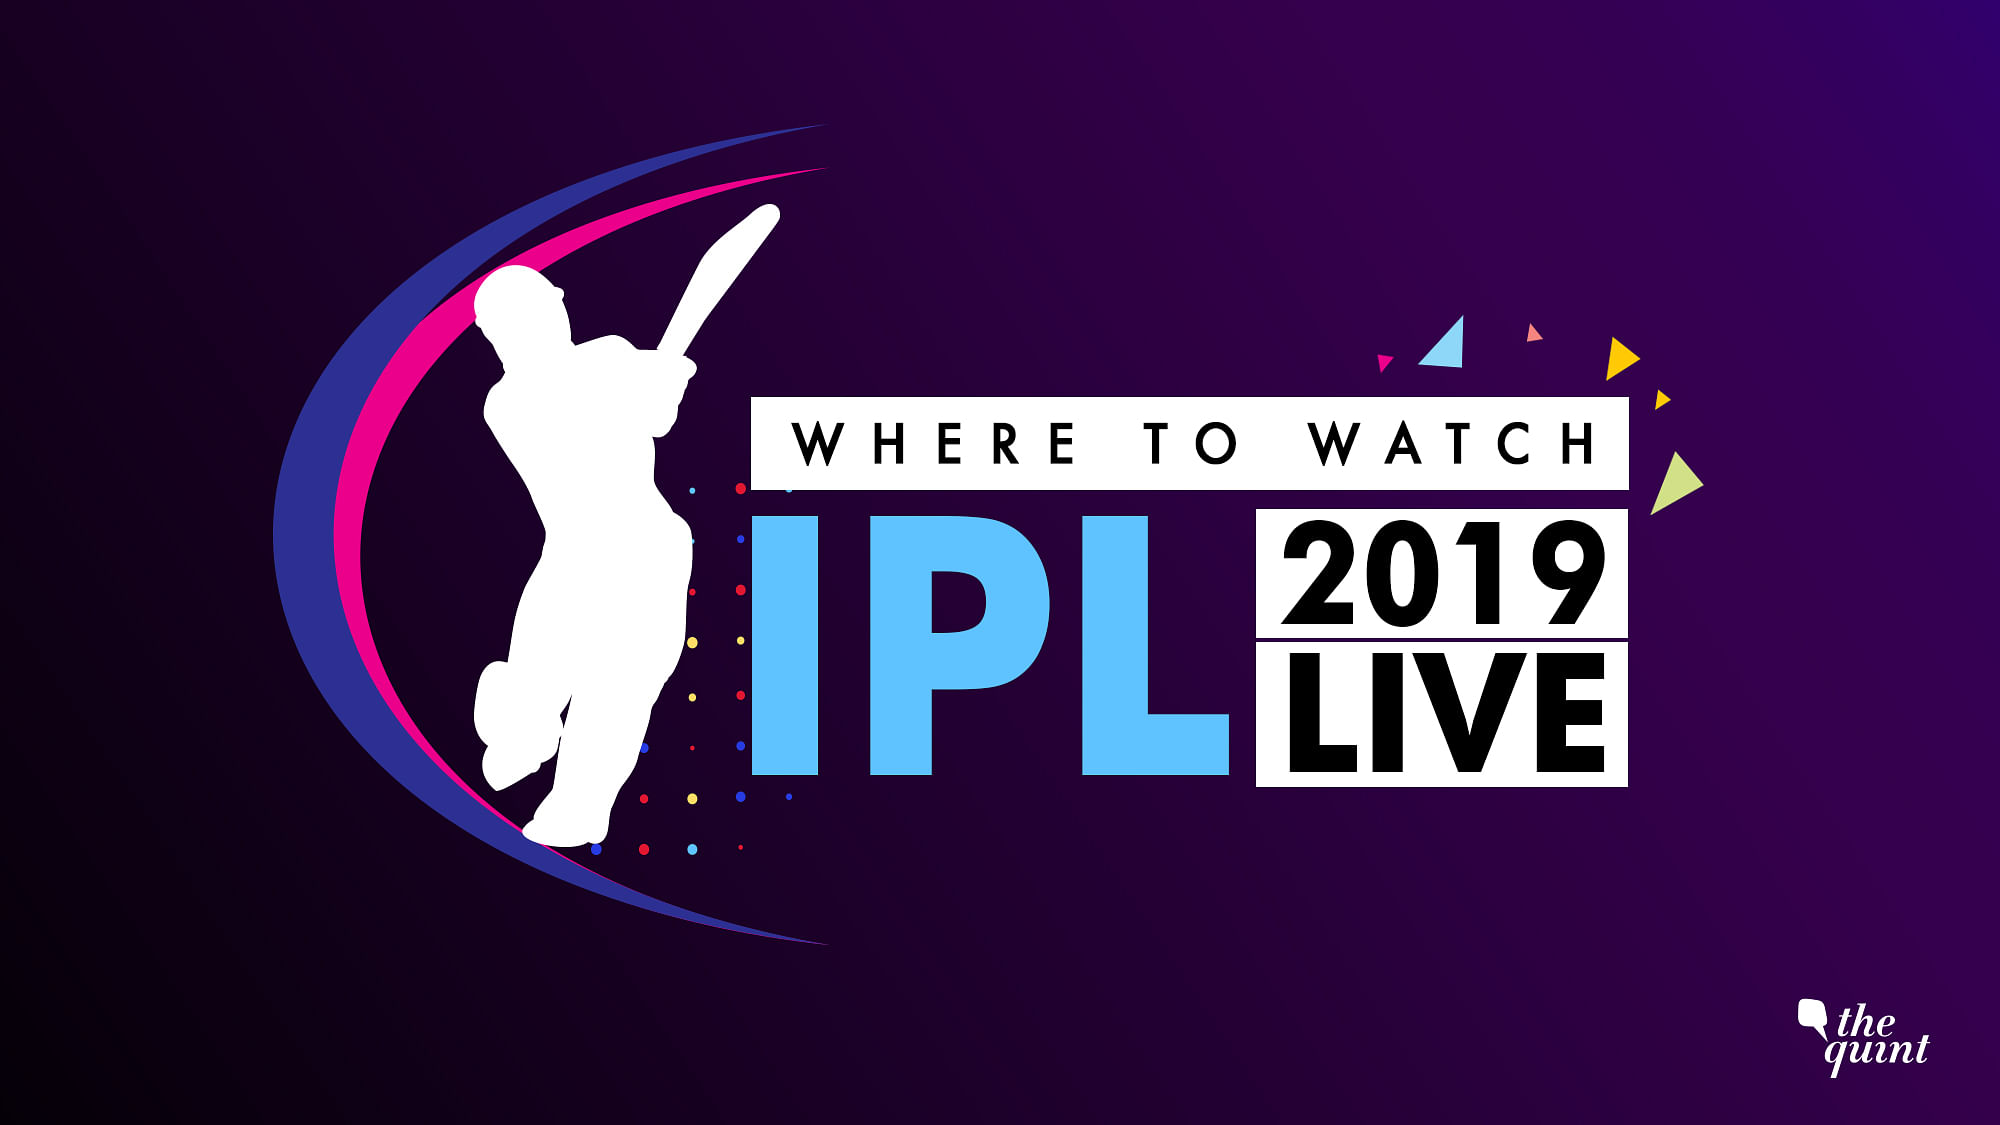 CSK vs DC, IPL 2019 Todays Match Players to Watch out for Fantasy Playing 11 Team, Head to Head, Watch LIVE Streaming LIVE Online on Hotstar